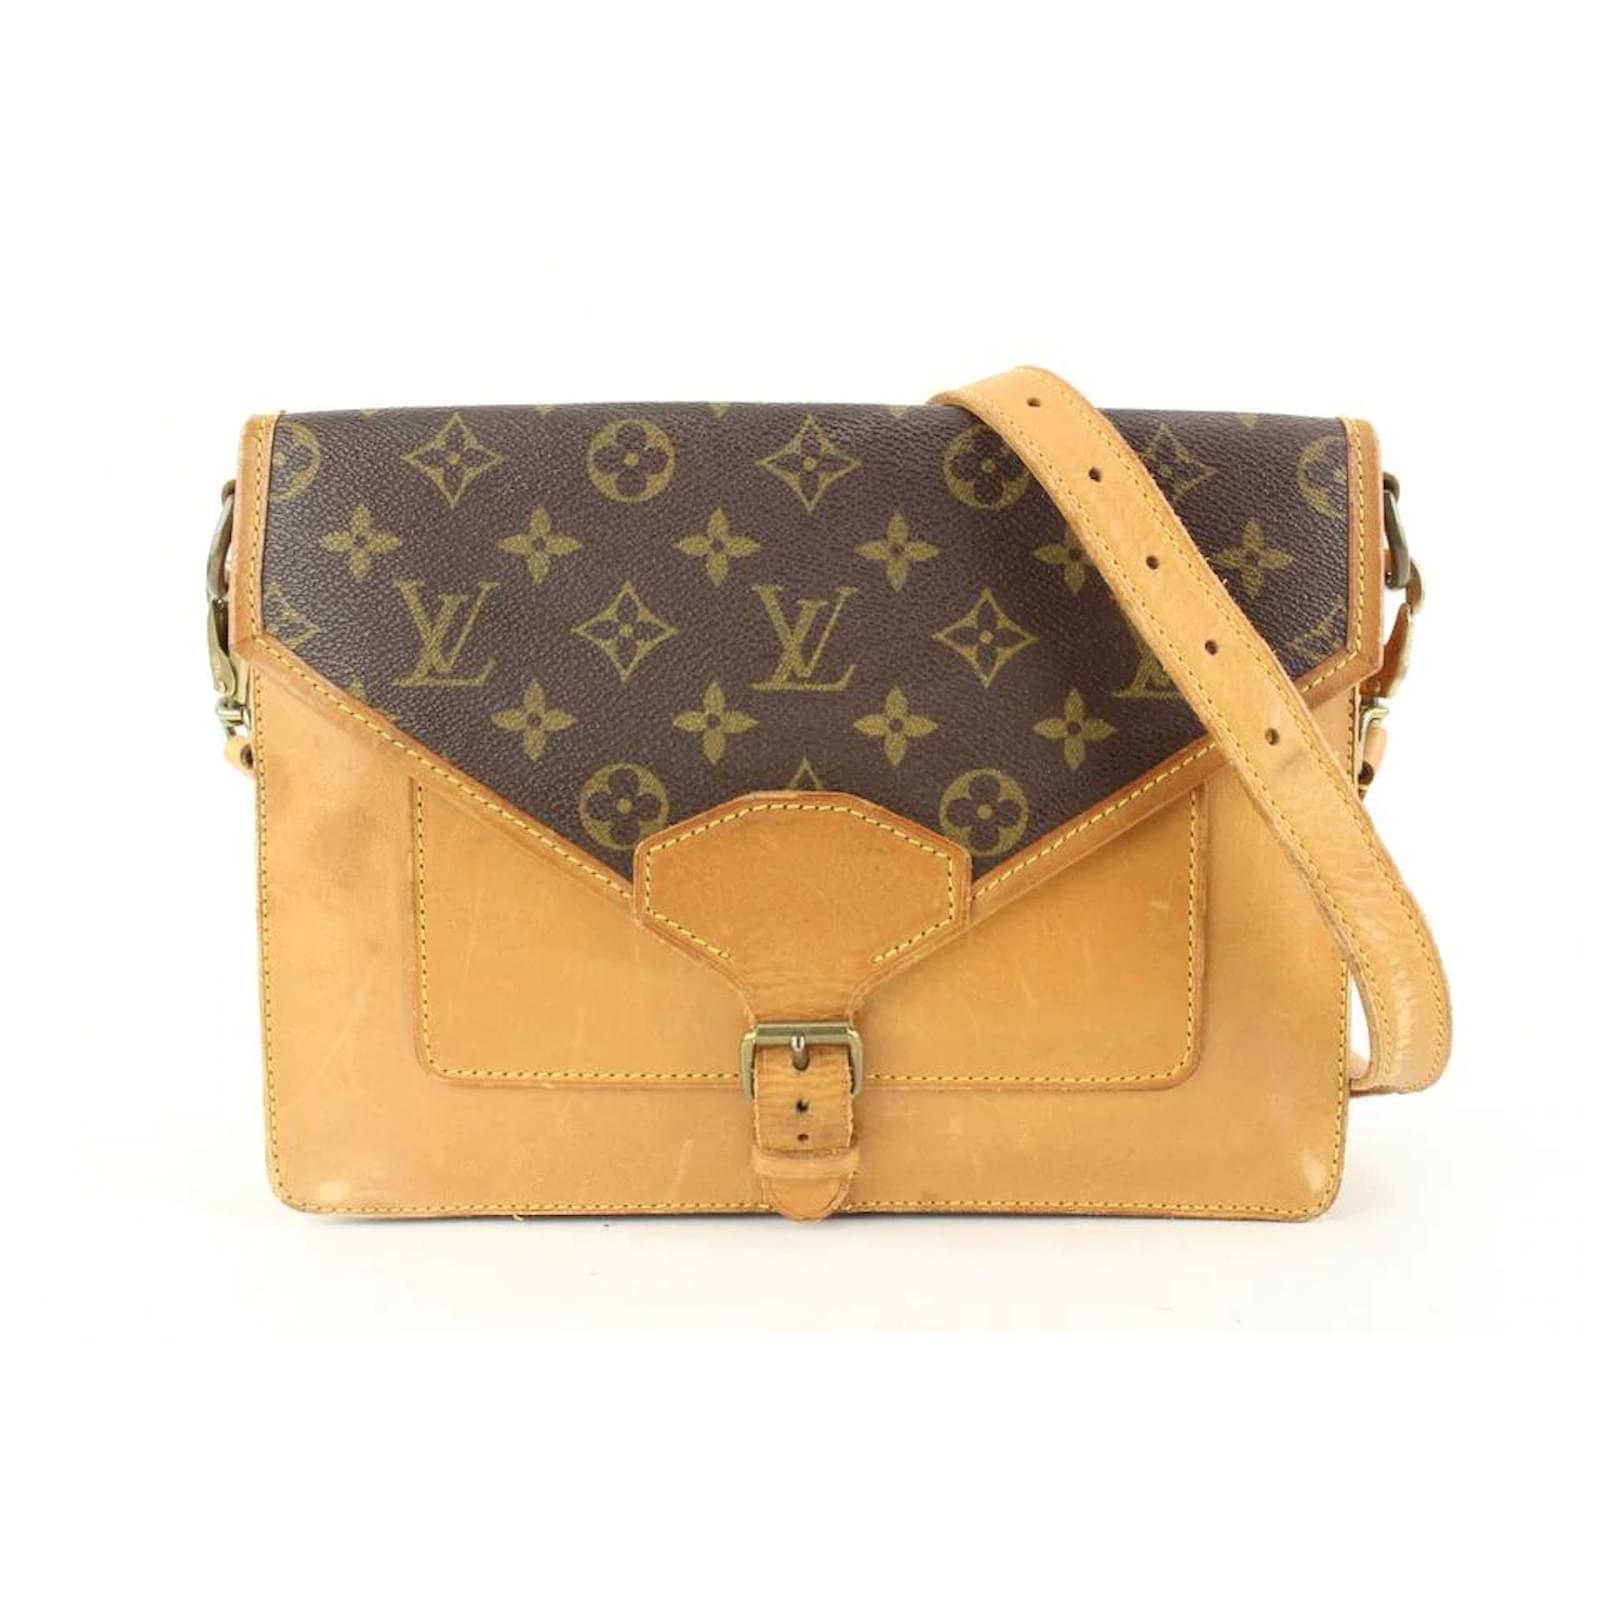 Vintage Louis Vuitton Trocadero Bag With Monogram From the -  Israel